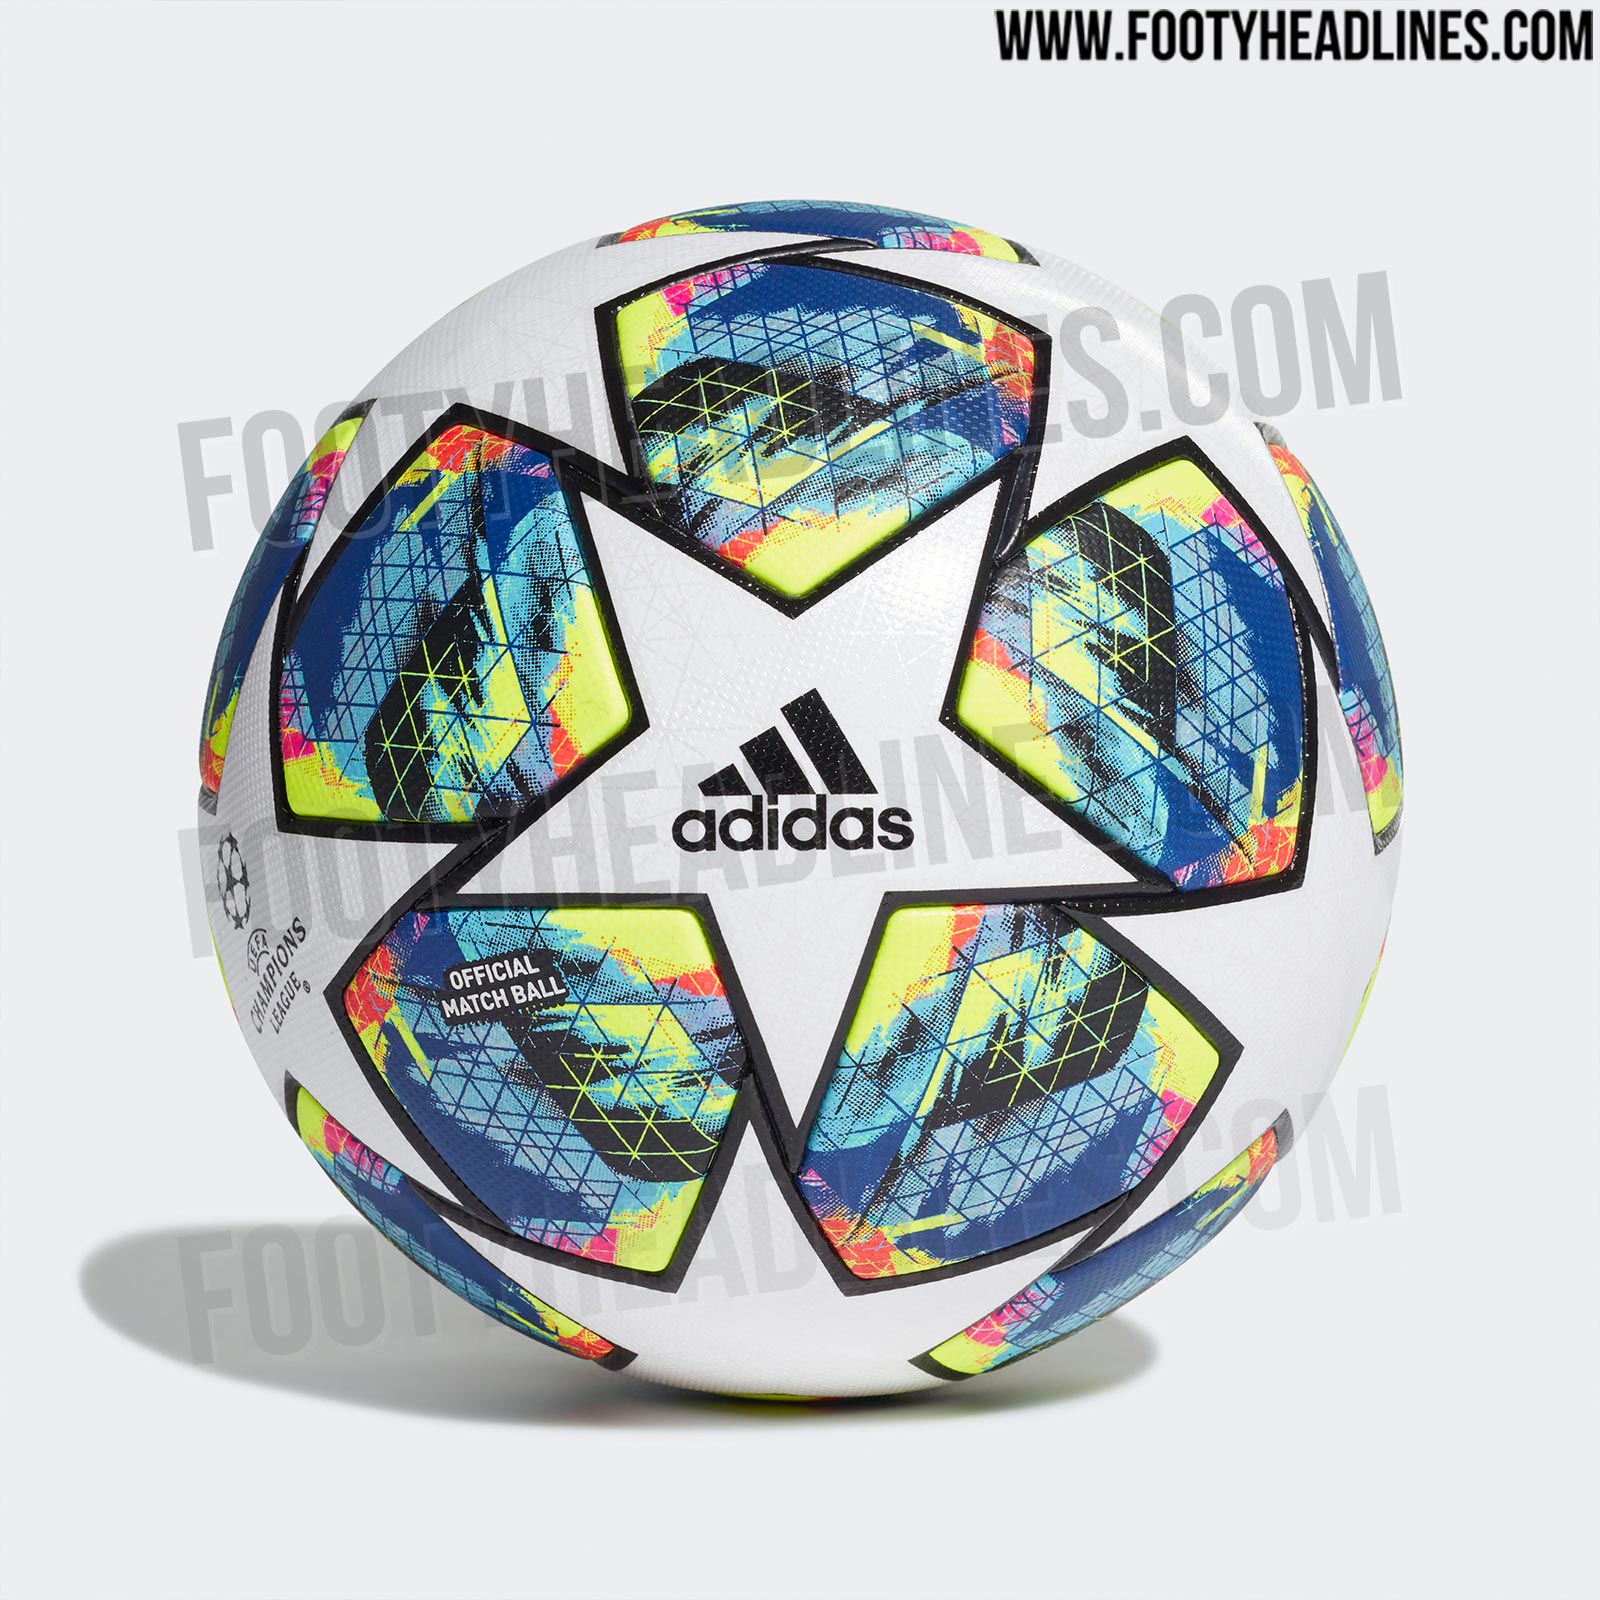 Adidas Champions League 19 20 Ball Released Updated Panels Construction Footy Headlines